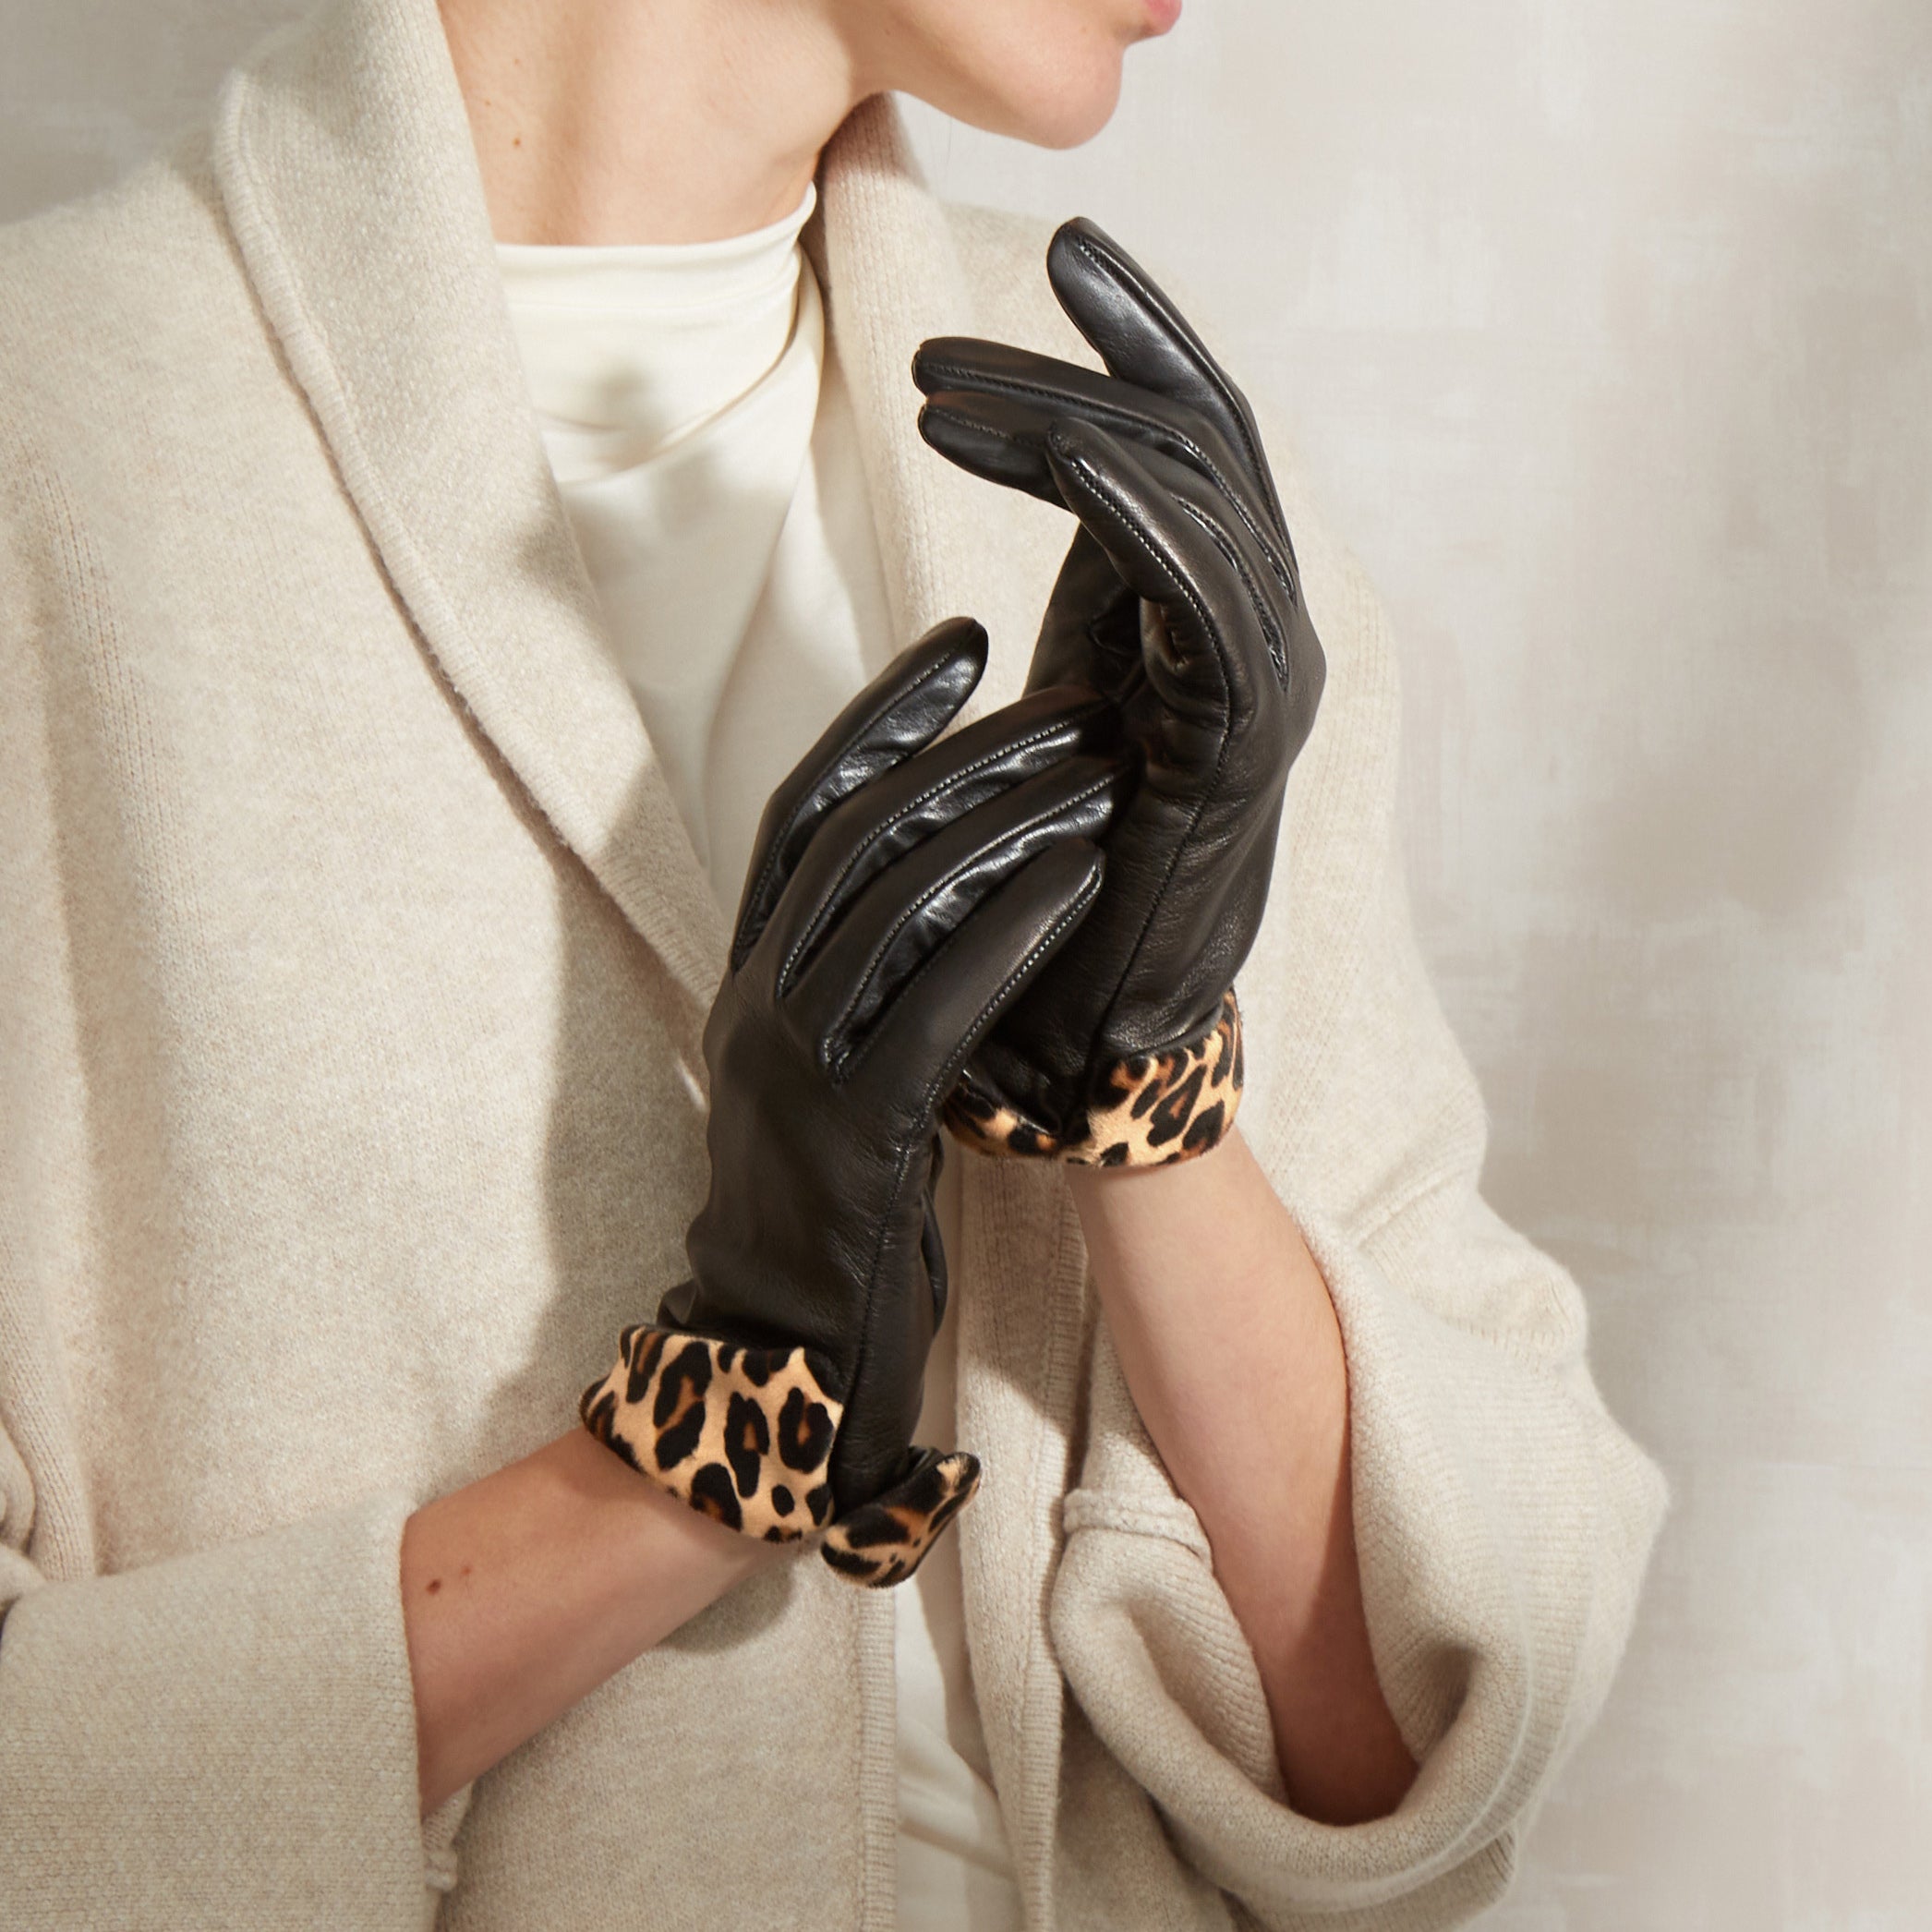 Cornelia James - Black Leather Gloves with Silk Lining - Natalie - Size Large (8½) - Handmade Leather Gloves by Cornelia James product